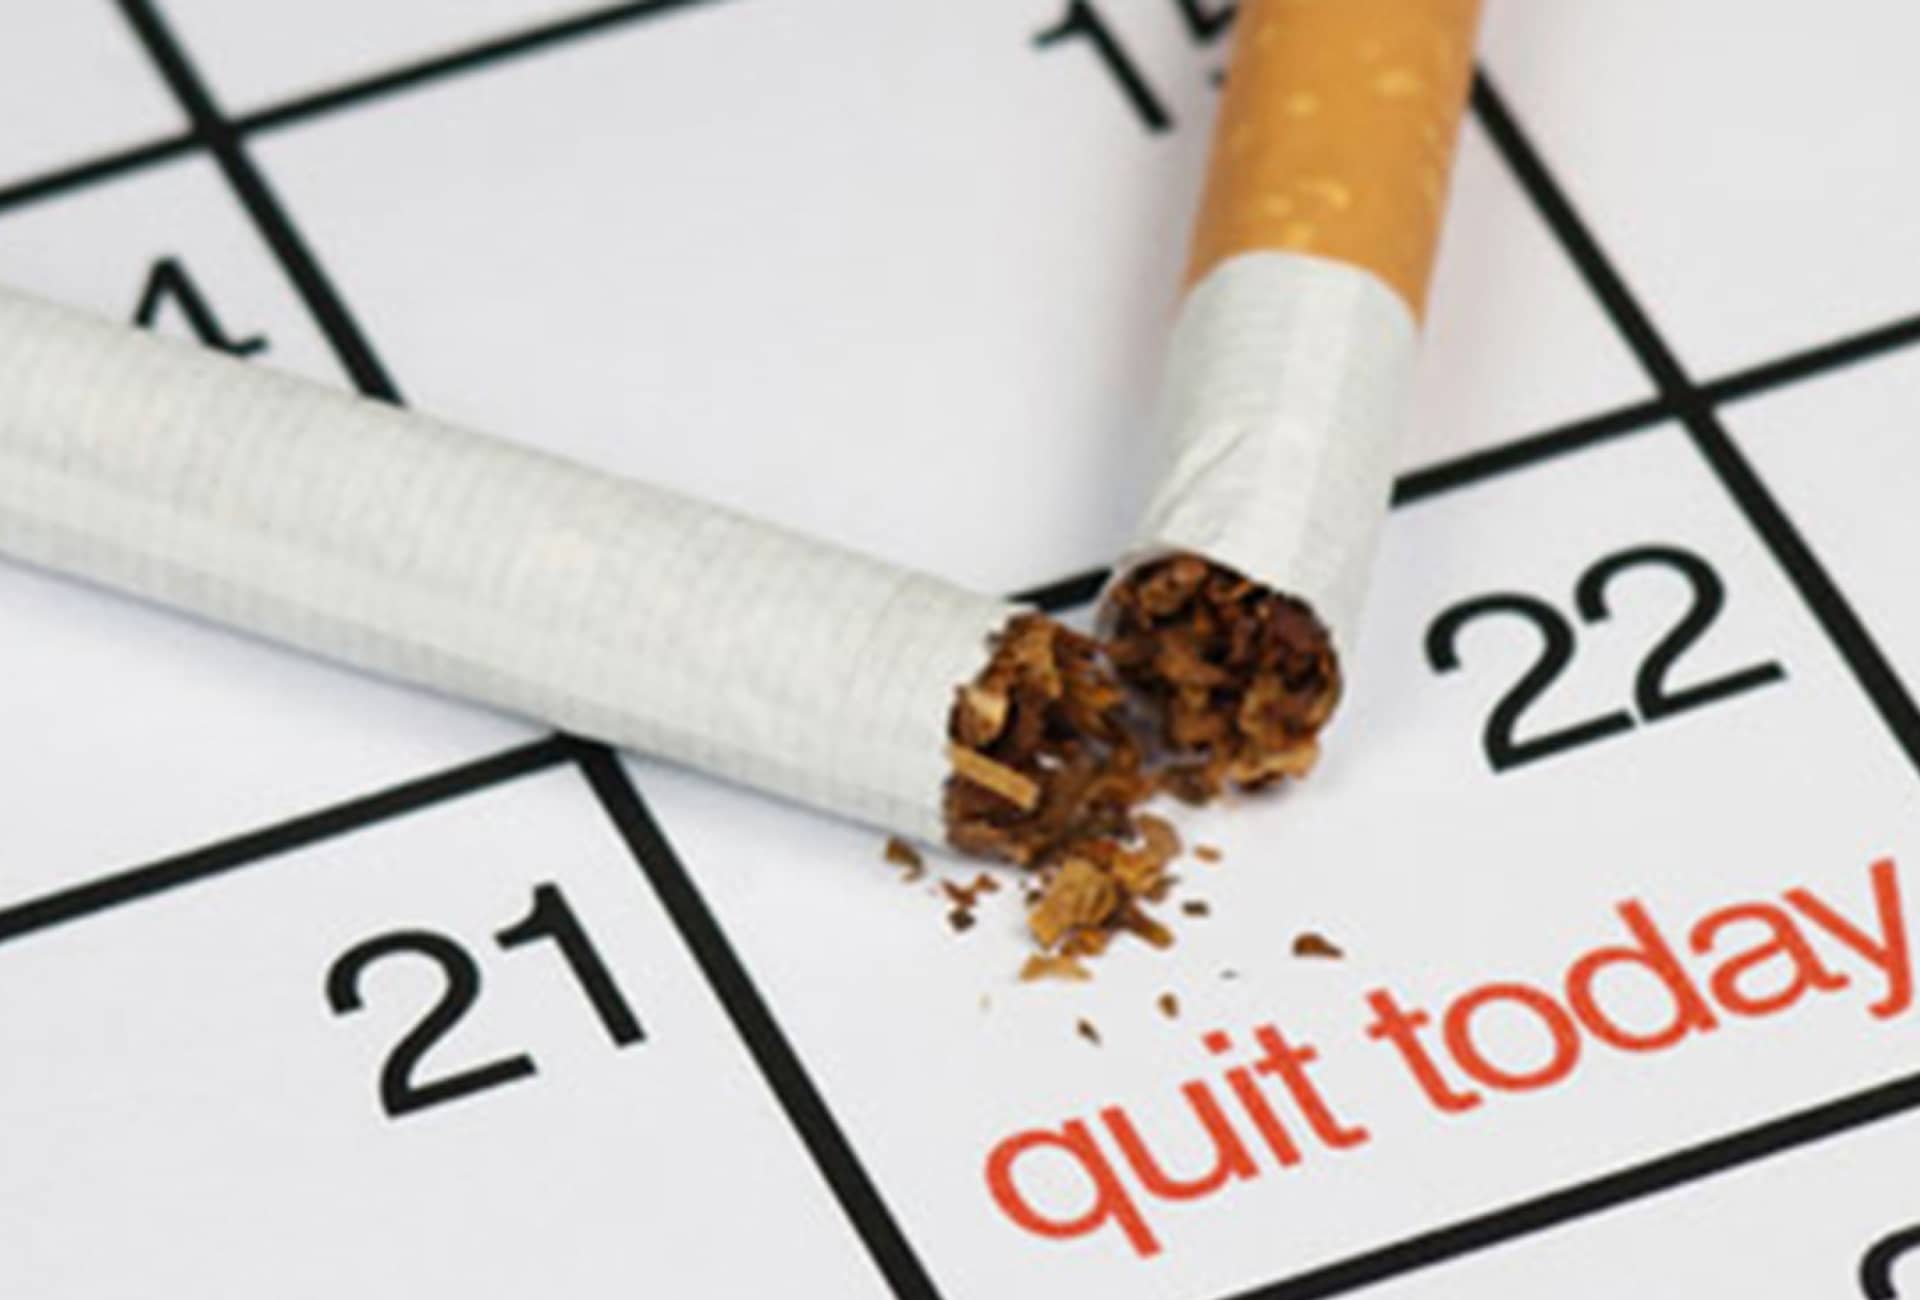 Stop smoking images of a calendar with a cigarette stubbed out